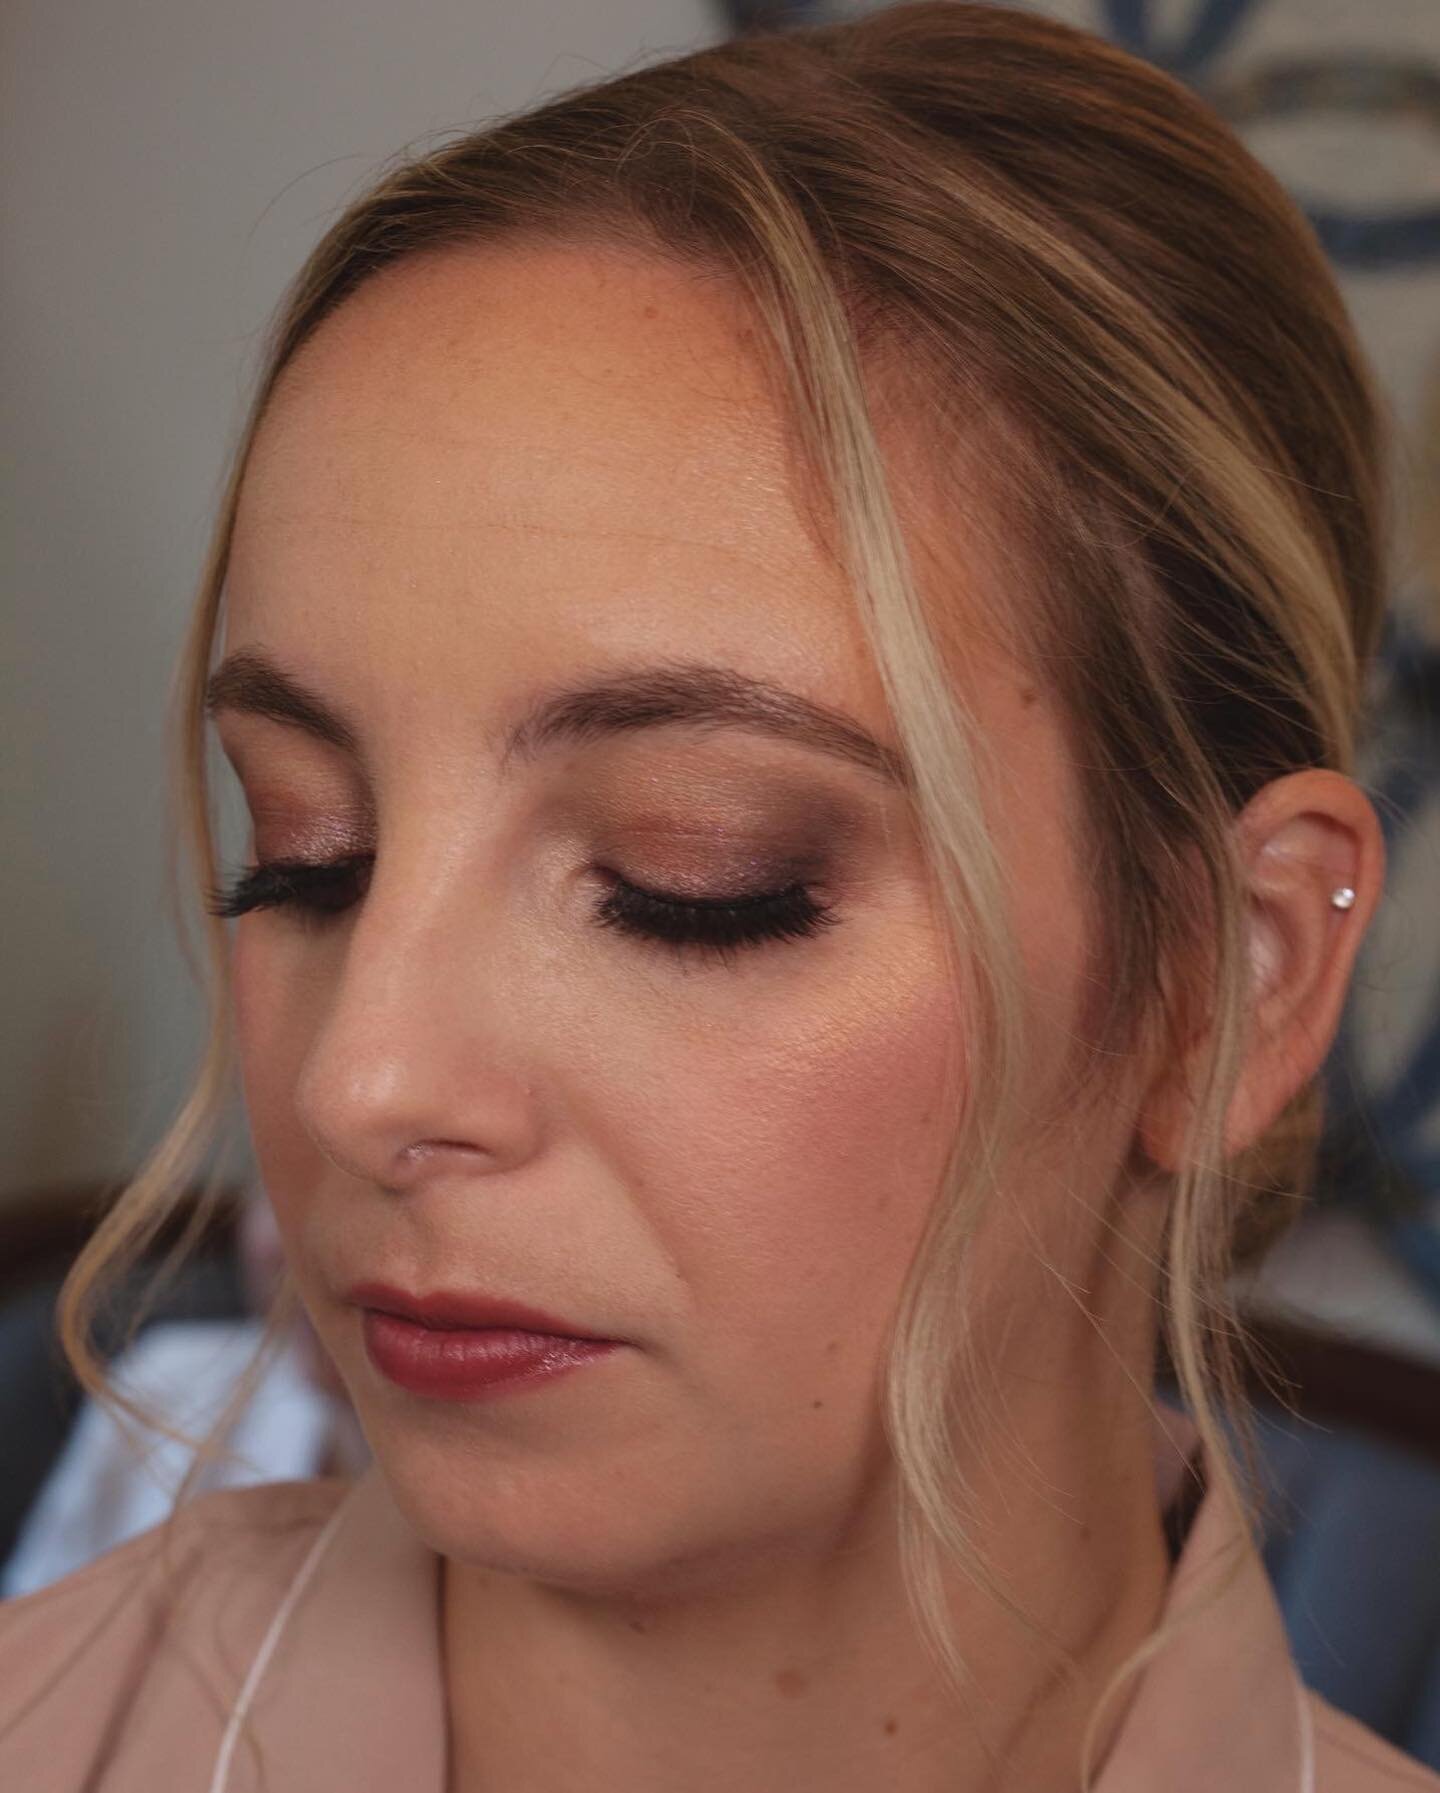 Beauitful chic smokey eye for this lovely bridesmaid ✨🎀⚜️

Makeup: @bluewavesmakeup 
Hair: @justwingitartistry 
Venue: @appalachianview 

&hellip;&hellip;&hellip;&hellip;&hellip;&hellip;.&hellip;&hellip;&hellip;&hellip;&hellip;&hellip;&hellip;&helli